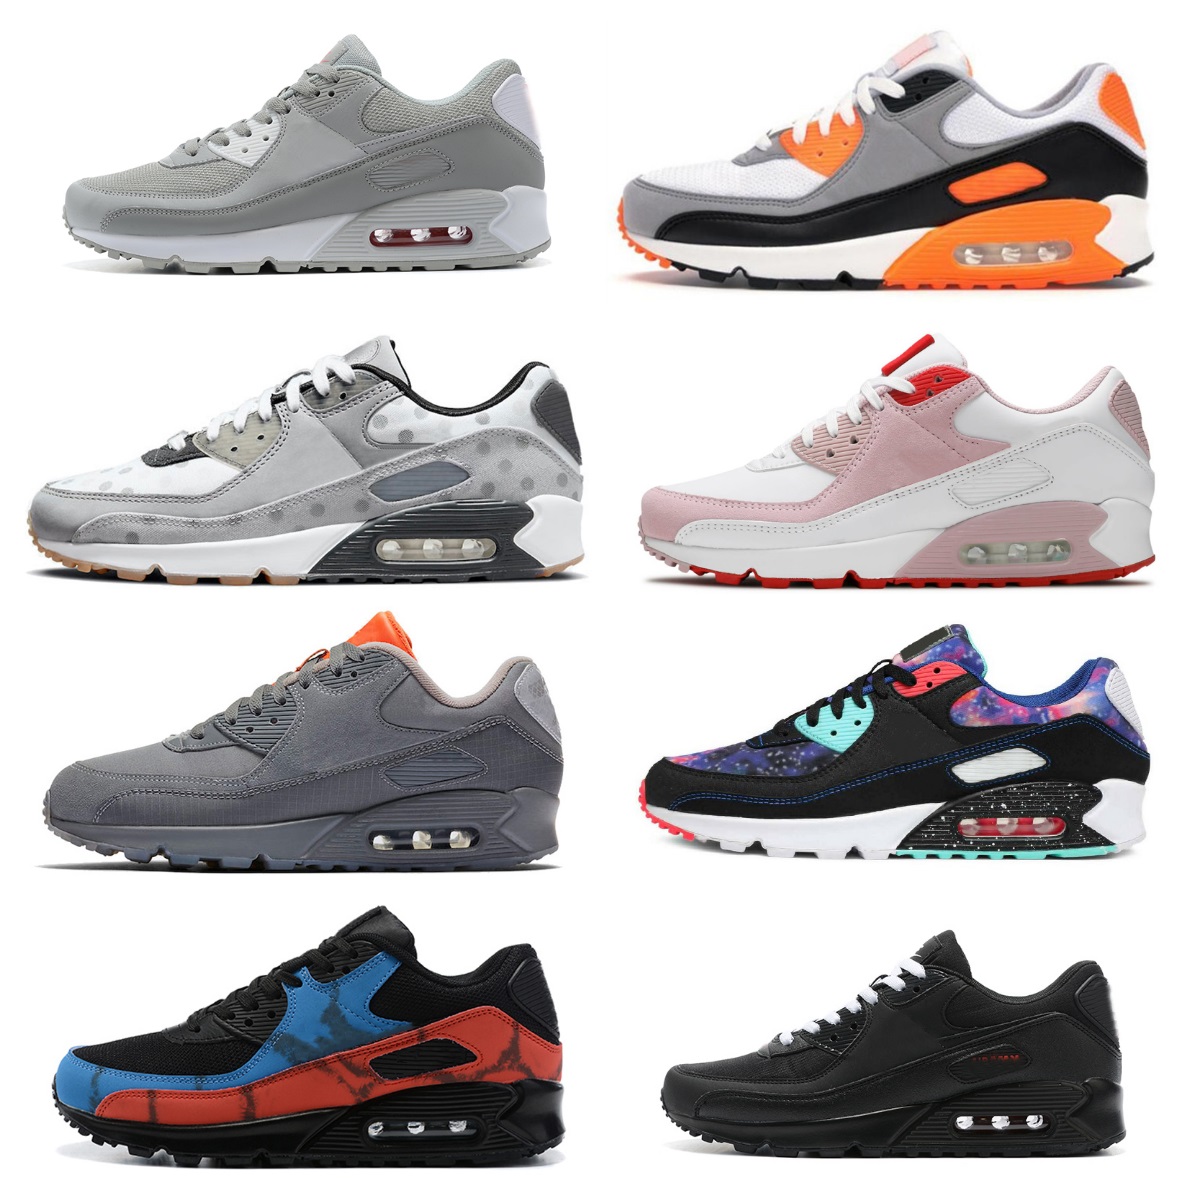 

OG 90 airmaxs running shoes Triple black white Rose Pink Hyper Turquoise Orange Camo Viotech Be True Laser Blue City Pack London 90s airs mens womens trainer sneakers, Bubble package bag